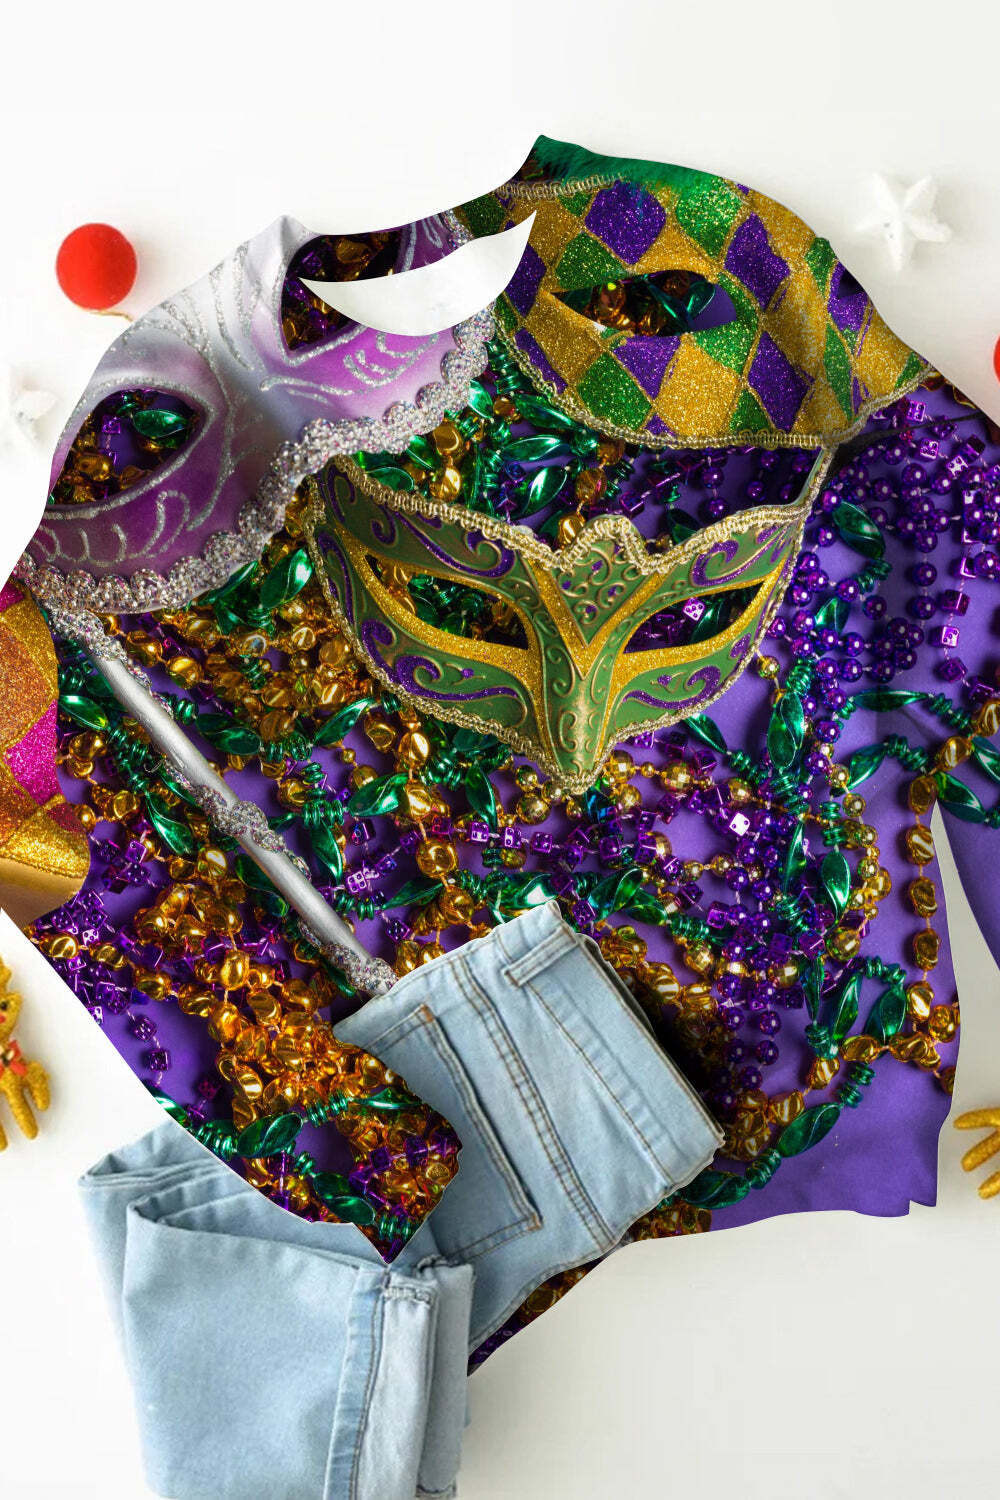 [CLEARANCE SALE]Mardi Gras Sequin Mask With Colored Beads Sweatshirt